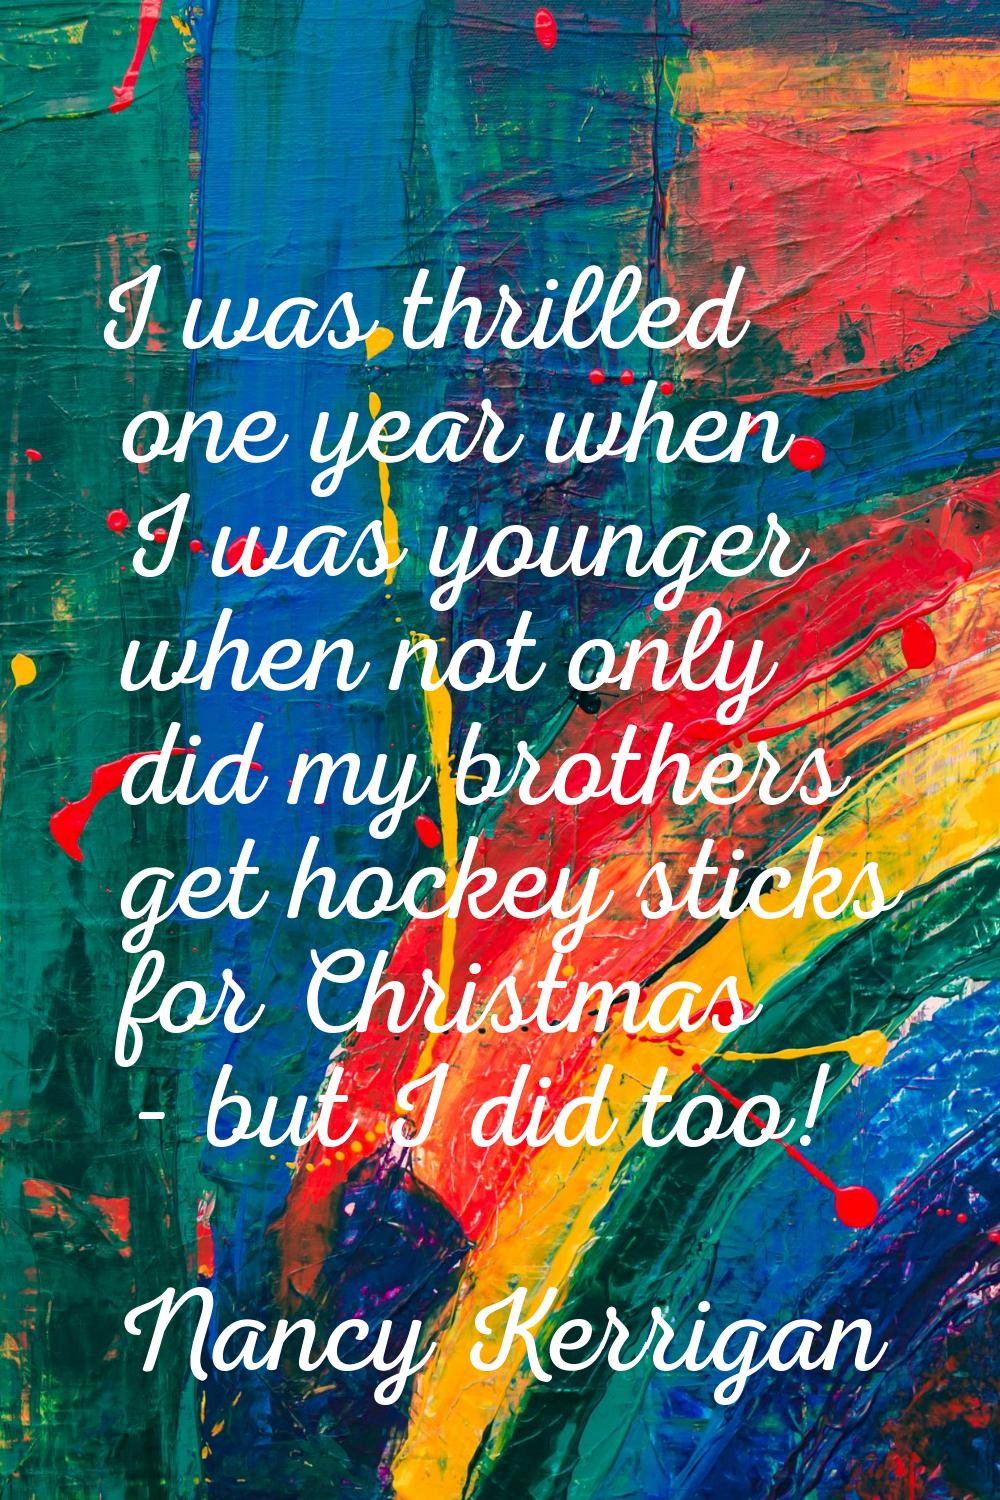 I was thrilled one year when I was younger when not only did my brothers get hockey sticks for Chri